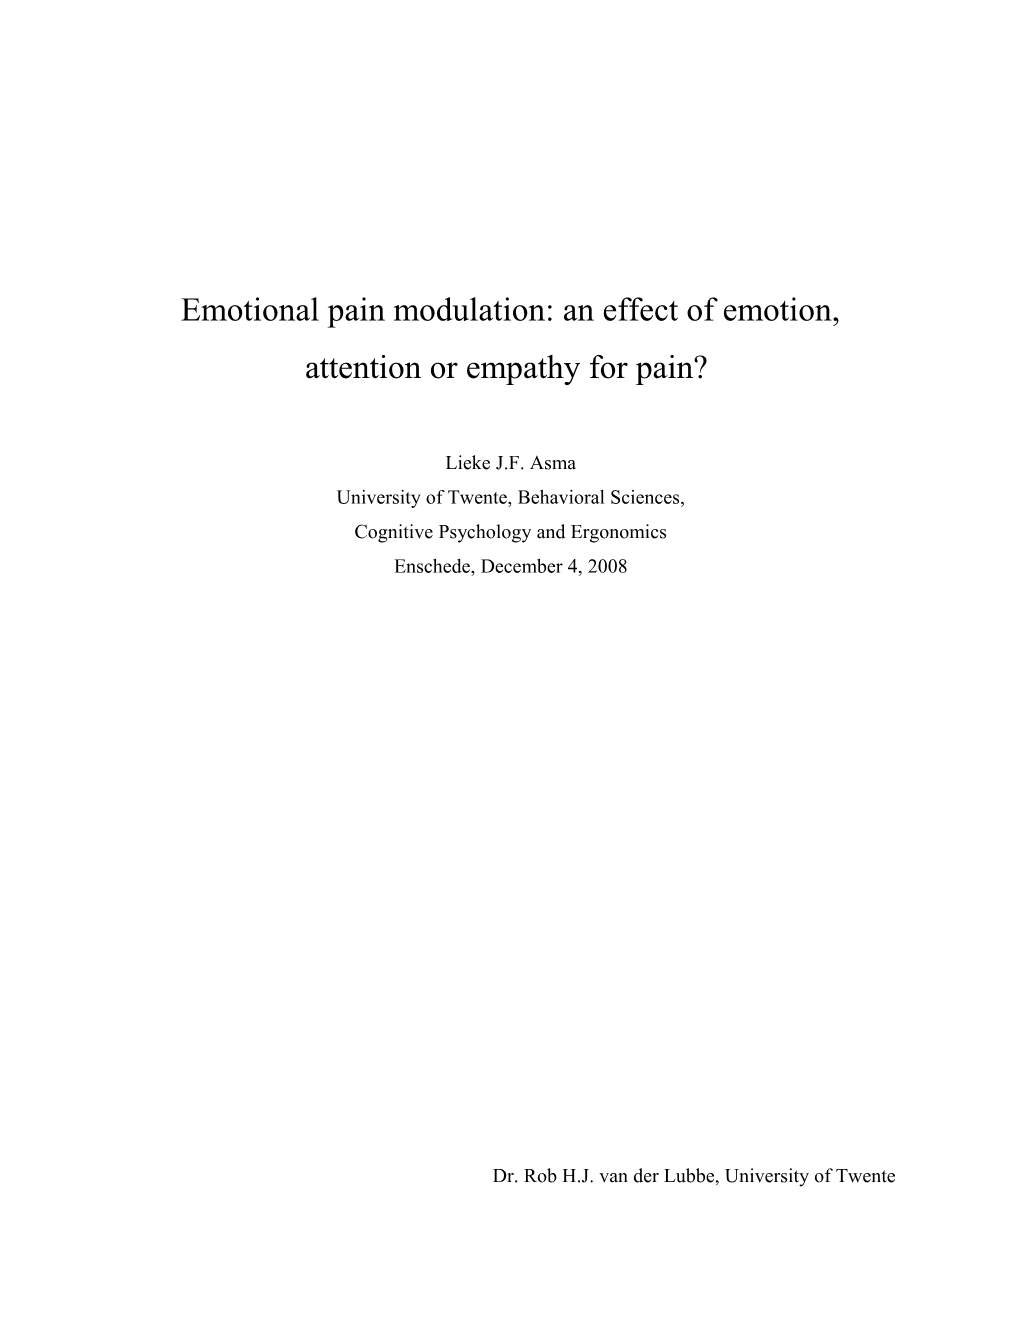 Recently, the Interest in the Influence of Emotion on Pain Is Growing